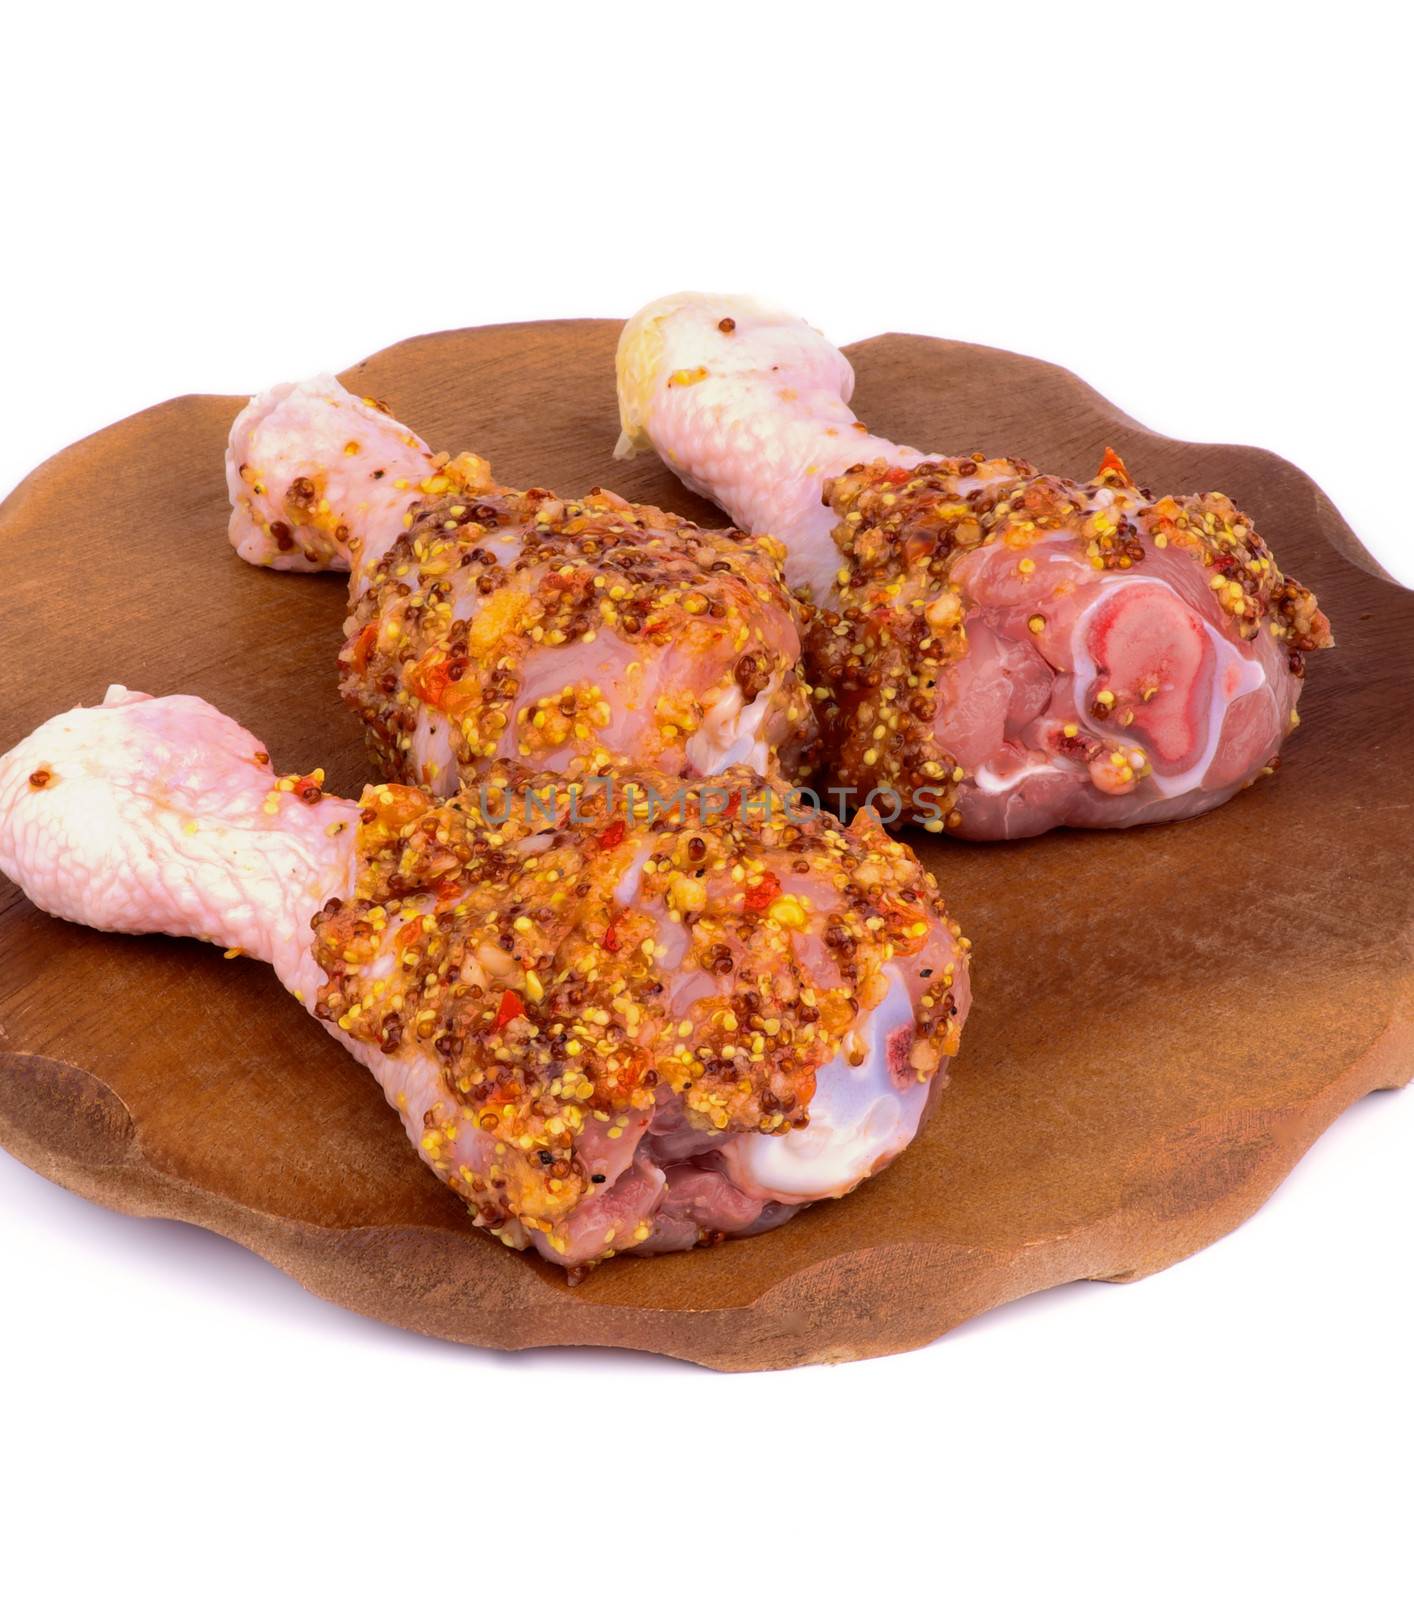 Three Raw Chicken Drumsticks Marinated with Whole Grain Mustard closeup on Wooden Plate on white background 